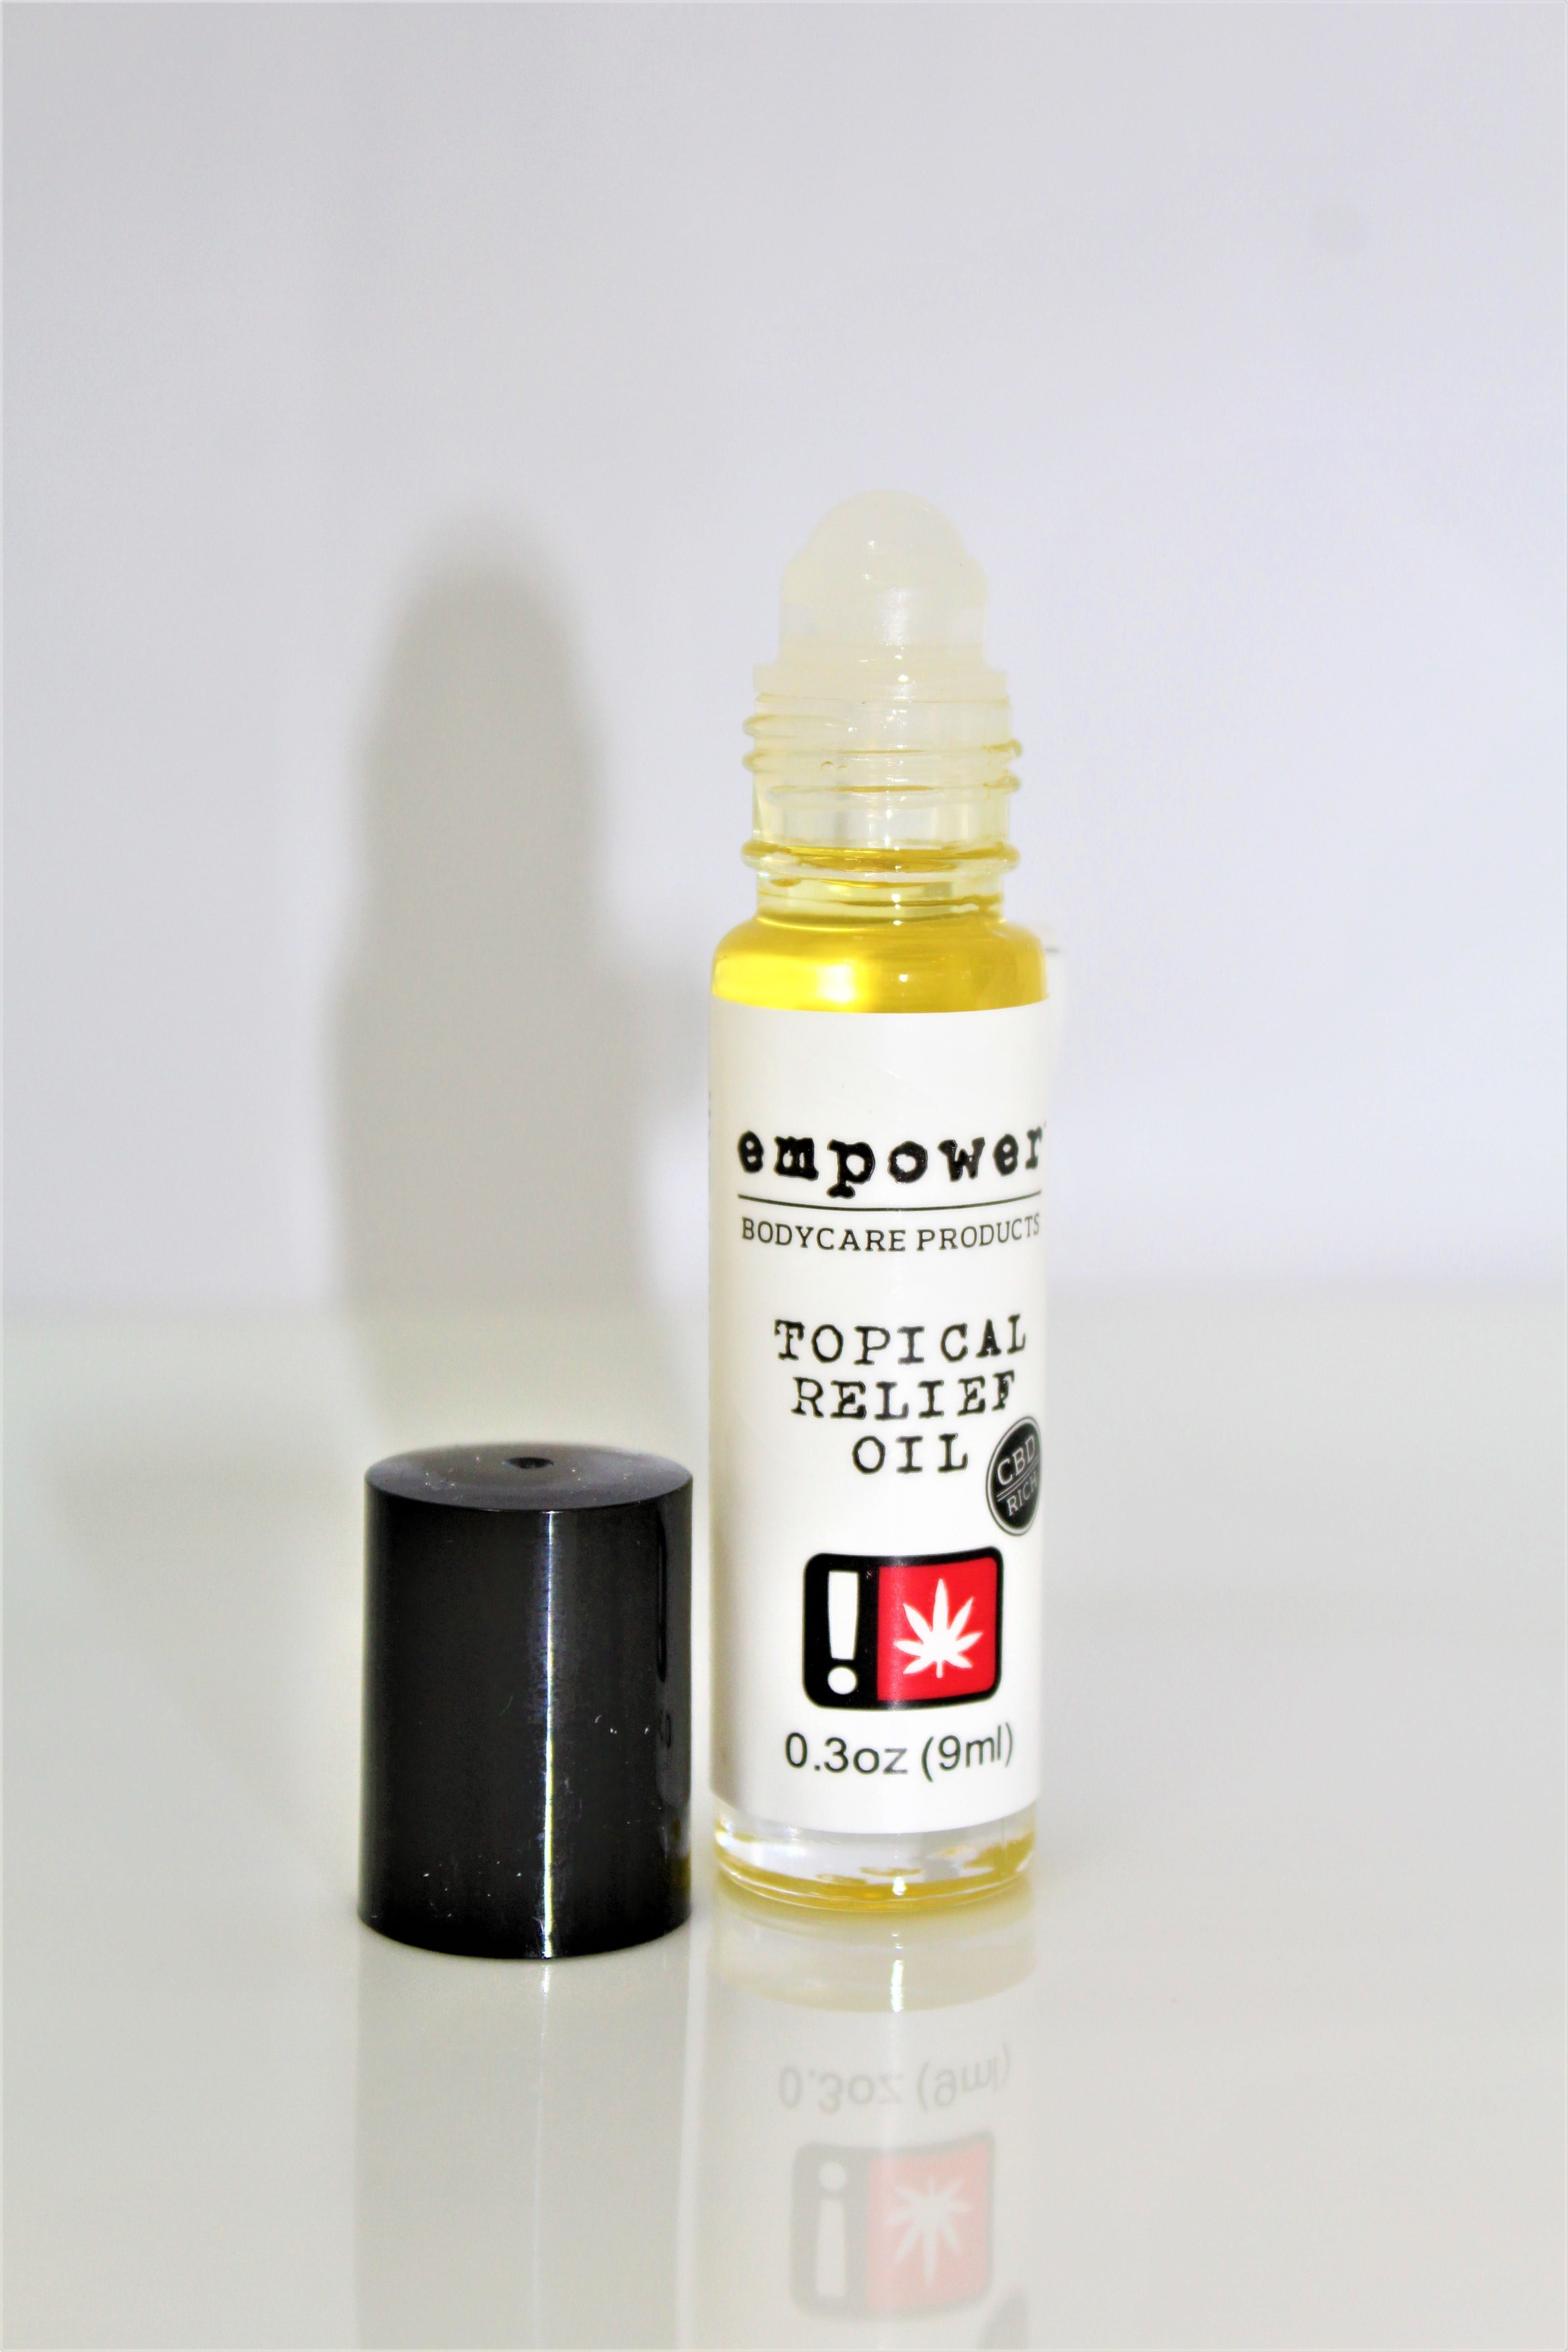 topicals-white-label-topical-relief-oil-9ml-66-75mg-cbd-empower